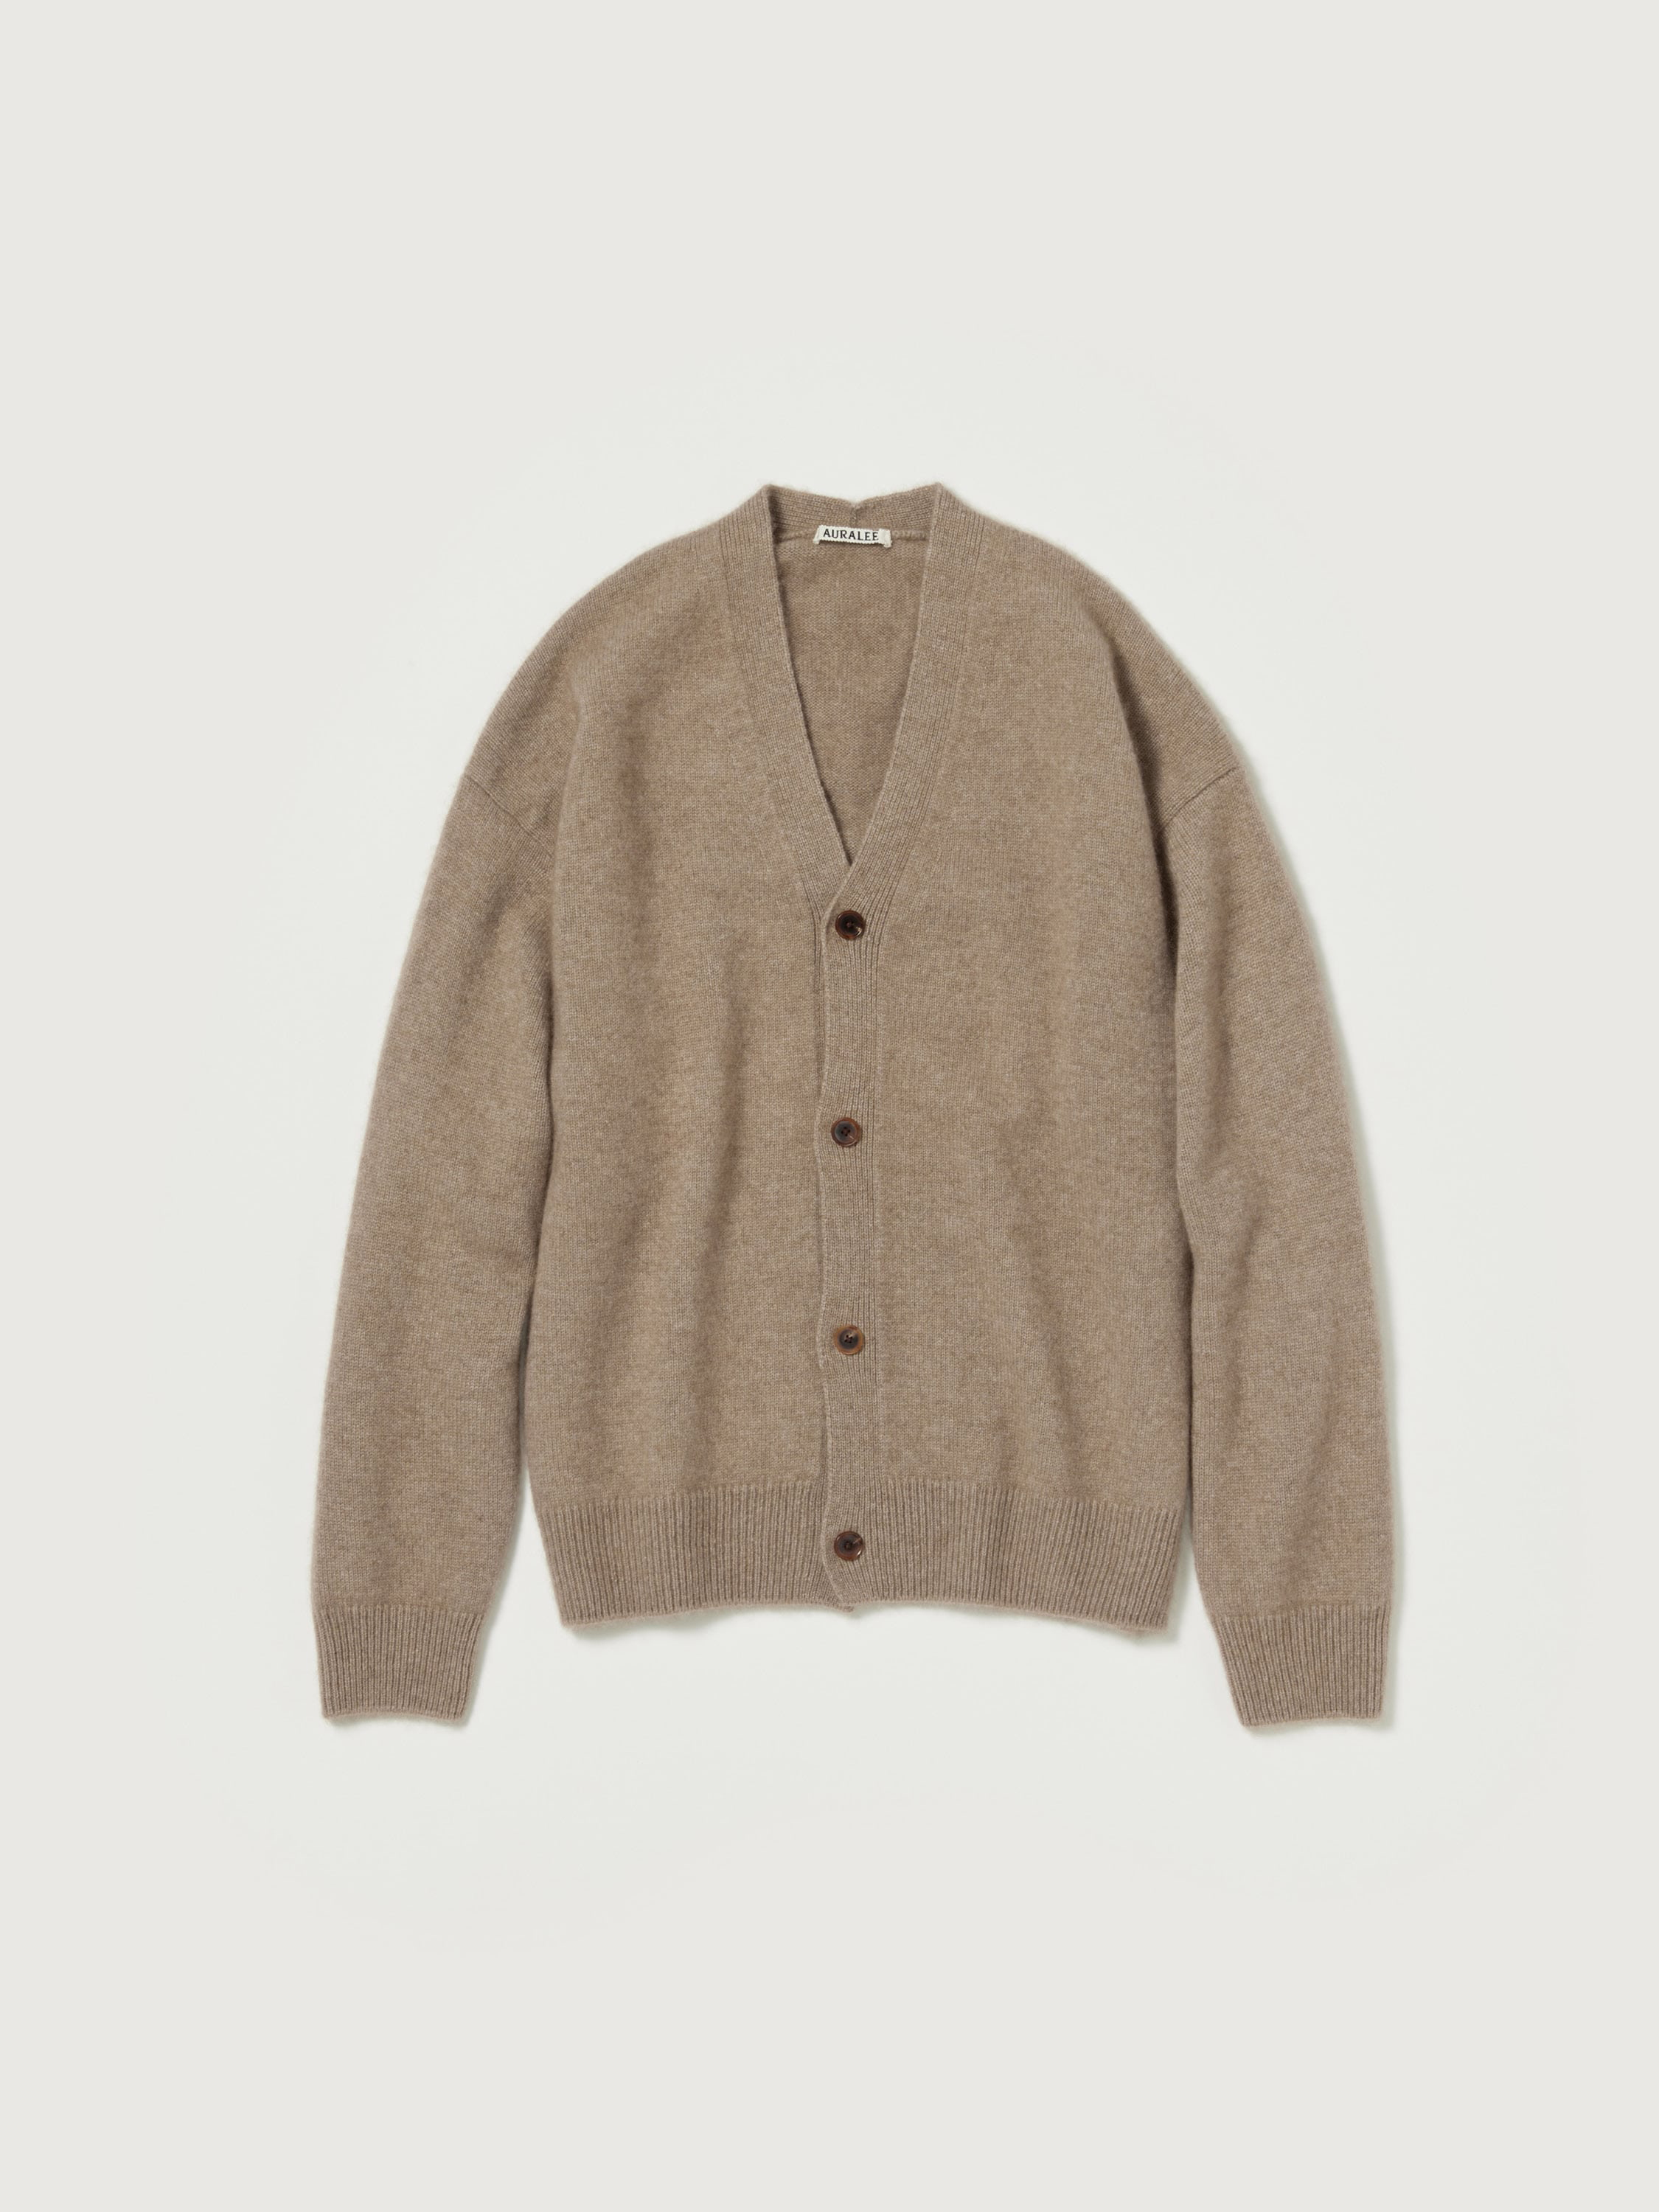 BABY CASHMERE KNIT CARDIGAN 詳細画像 NATURAL BROWN 1